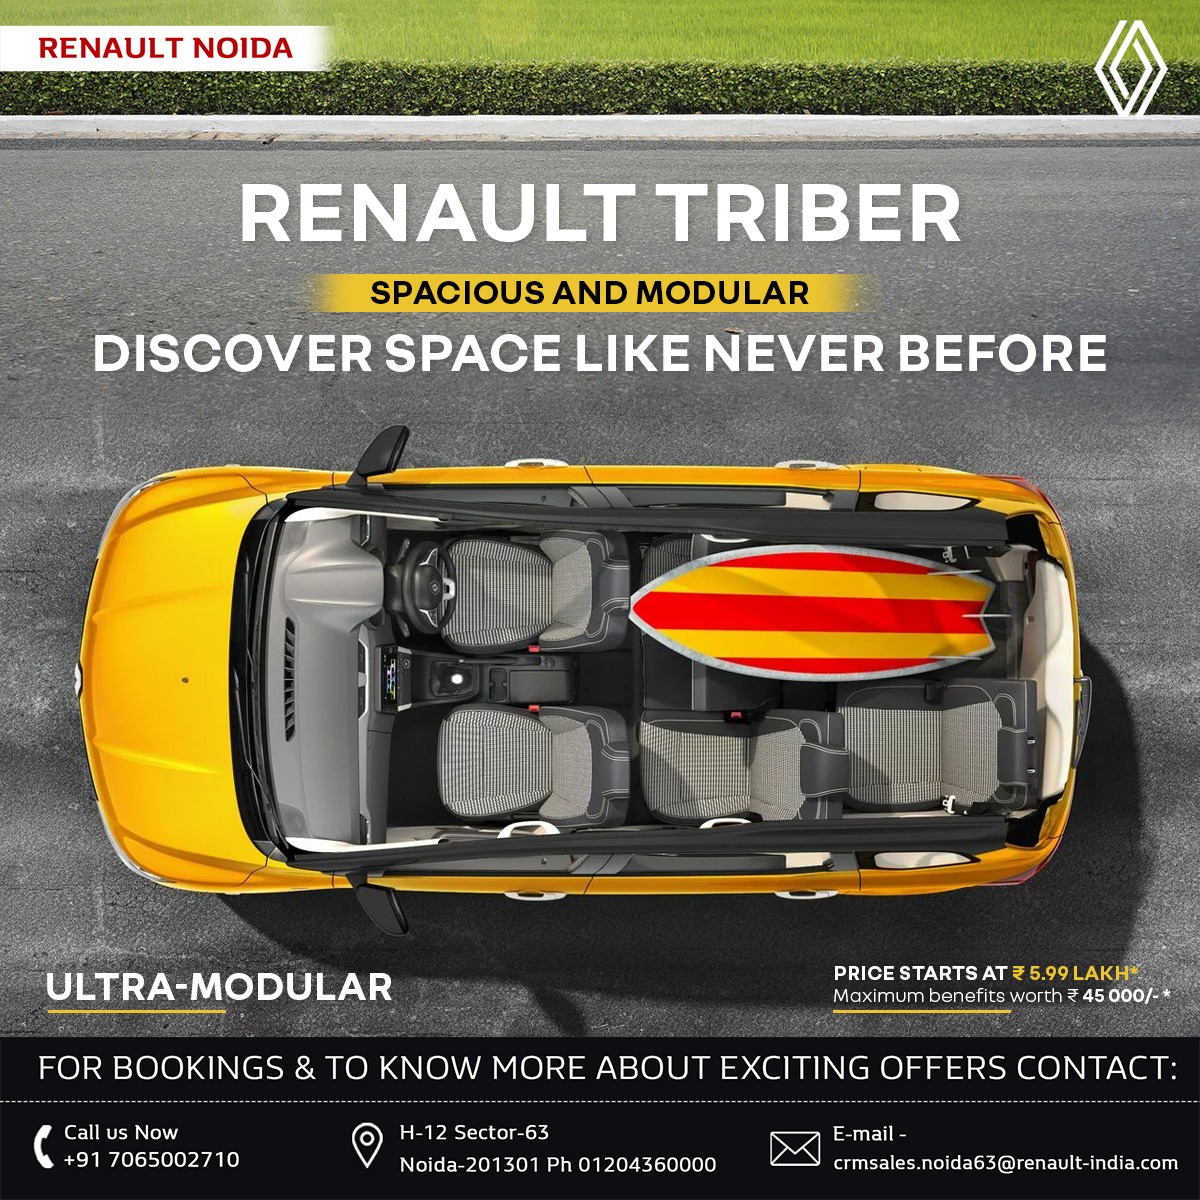 Unleash a new era of space and versatility with the #RenaultTriber! 🚘✨ Elevate your driving experience with its spacious and modular design. Your journey, your way. 
#Renault #Triber #MPV #VersatileDriving #CarLove
#VersatileJourney #SecureDrive #DriveConfidently #SafetyFirst